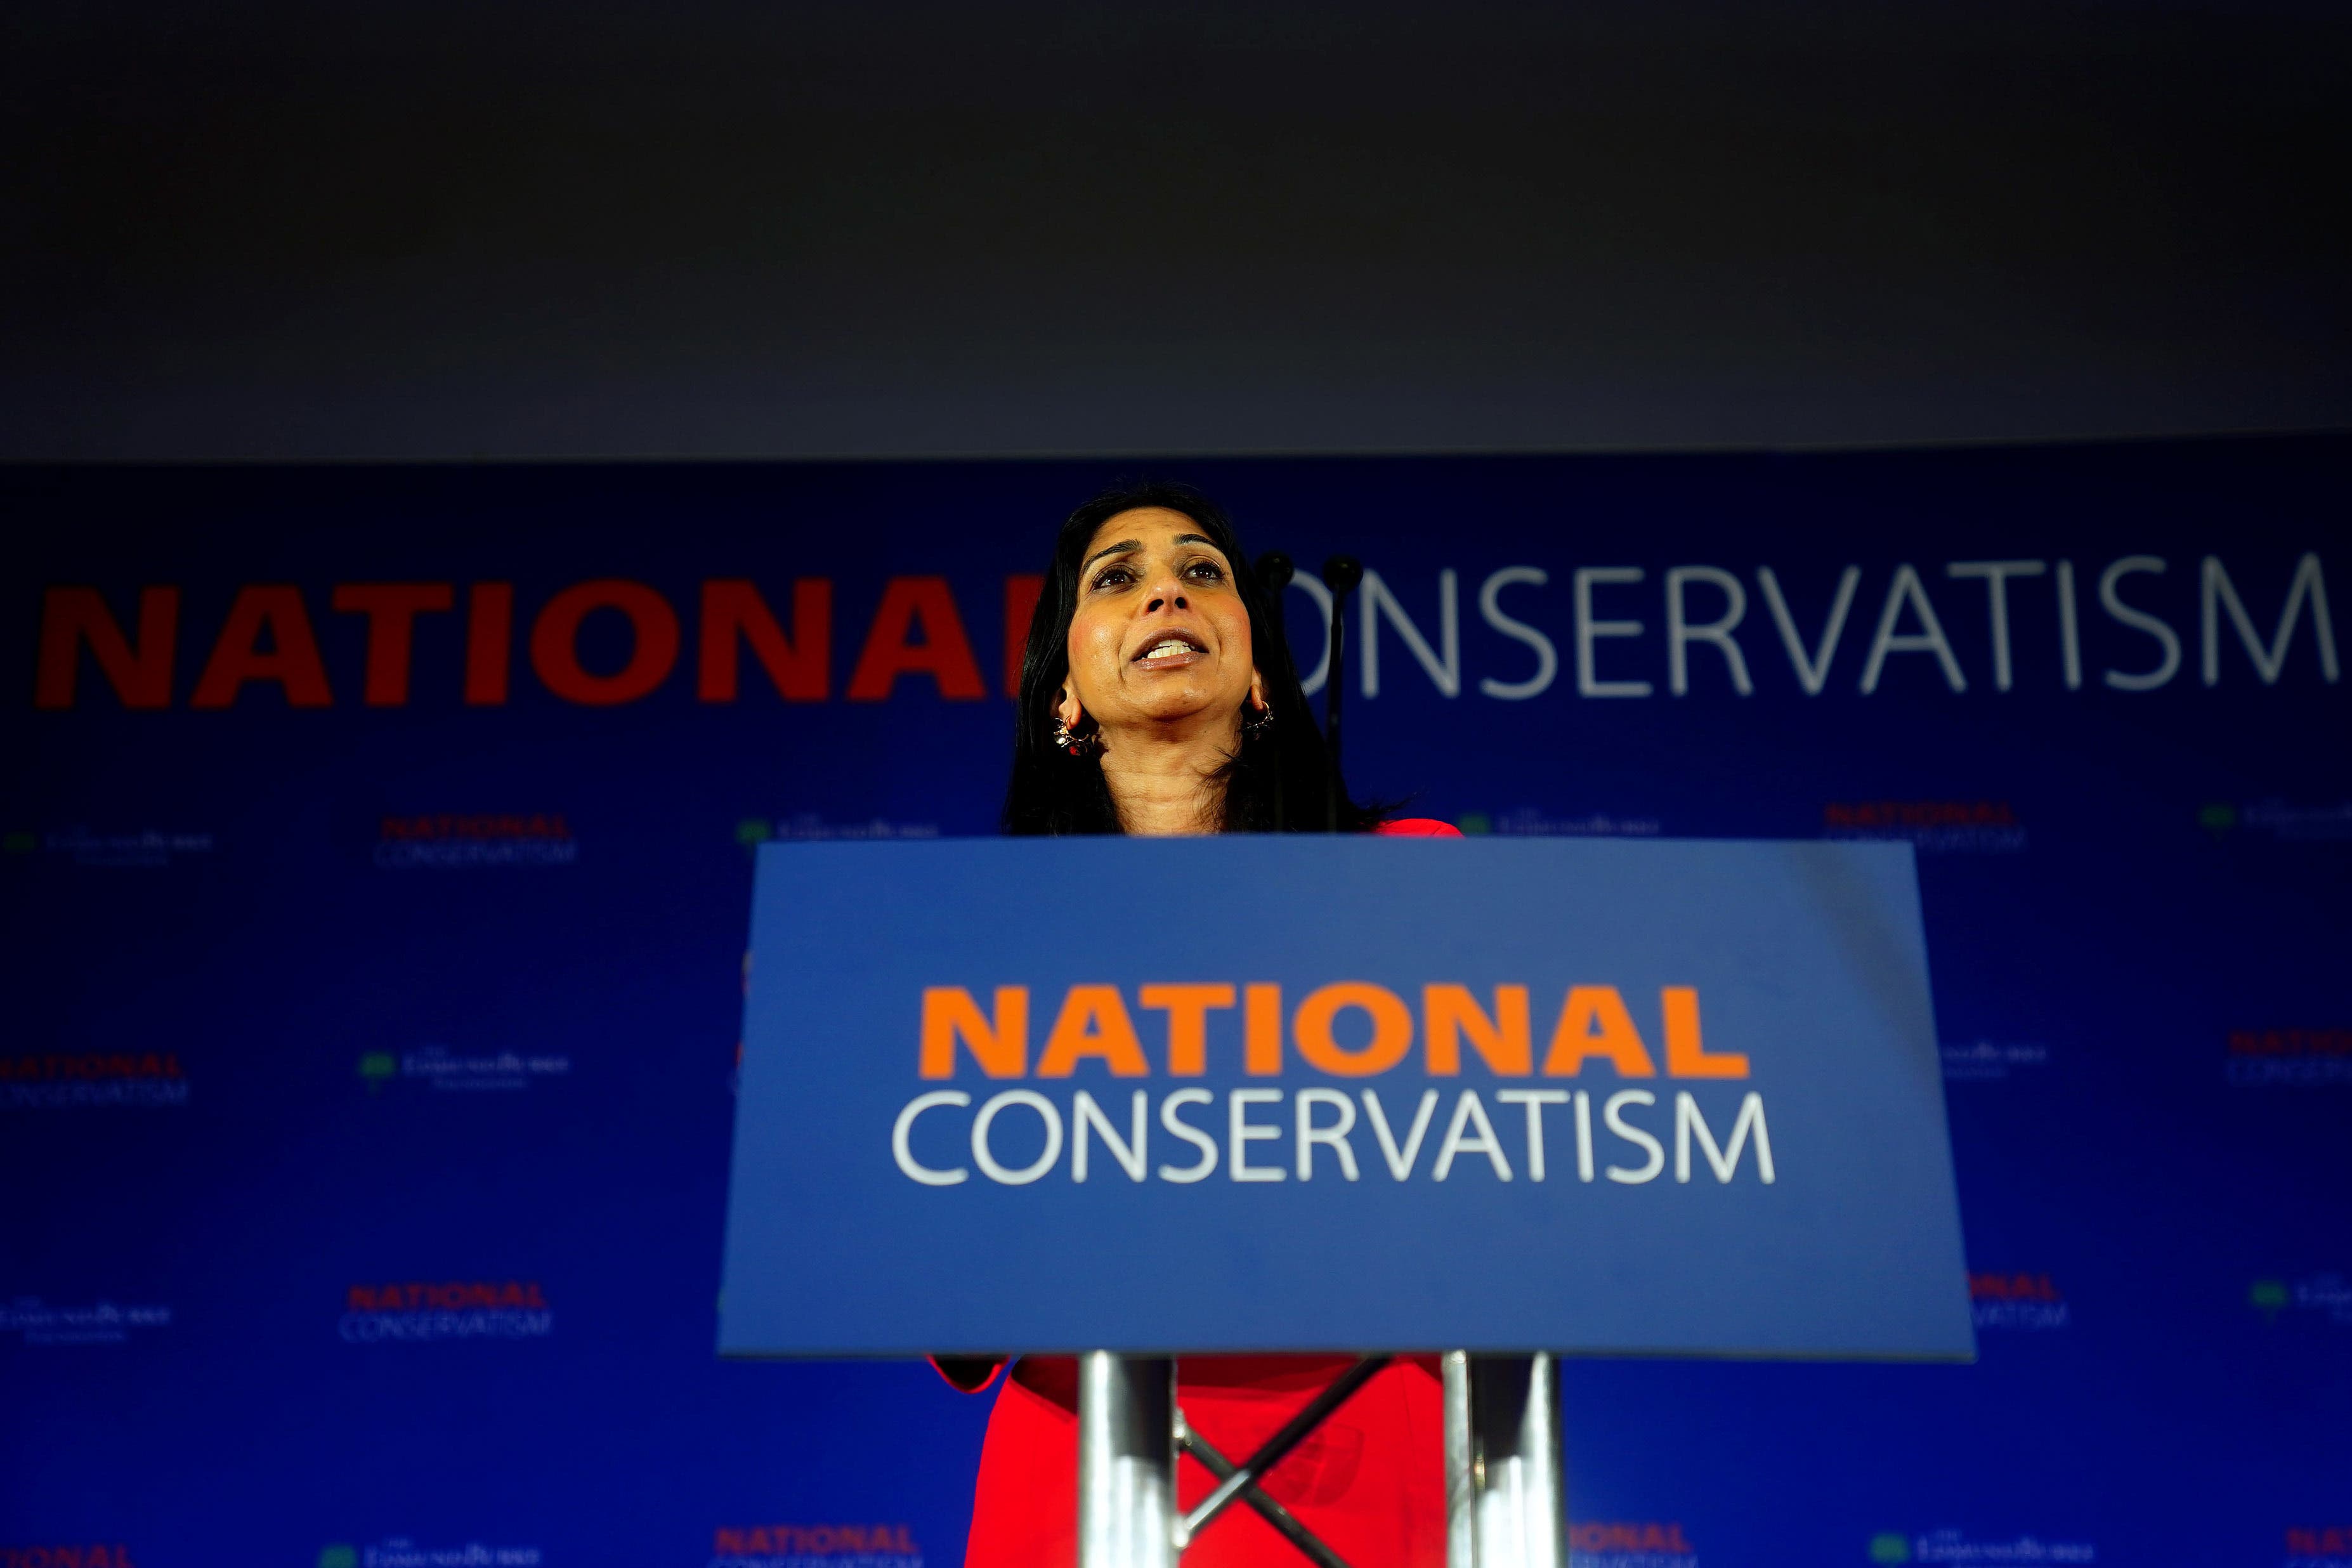 Home Secretary Suella Braverman speaking during the National Conservatism Conference at the Emmanuel Centre, central London. (Victoria Jones/PA)